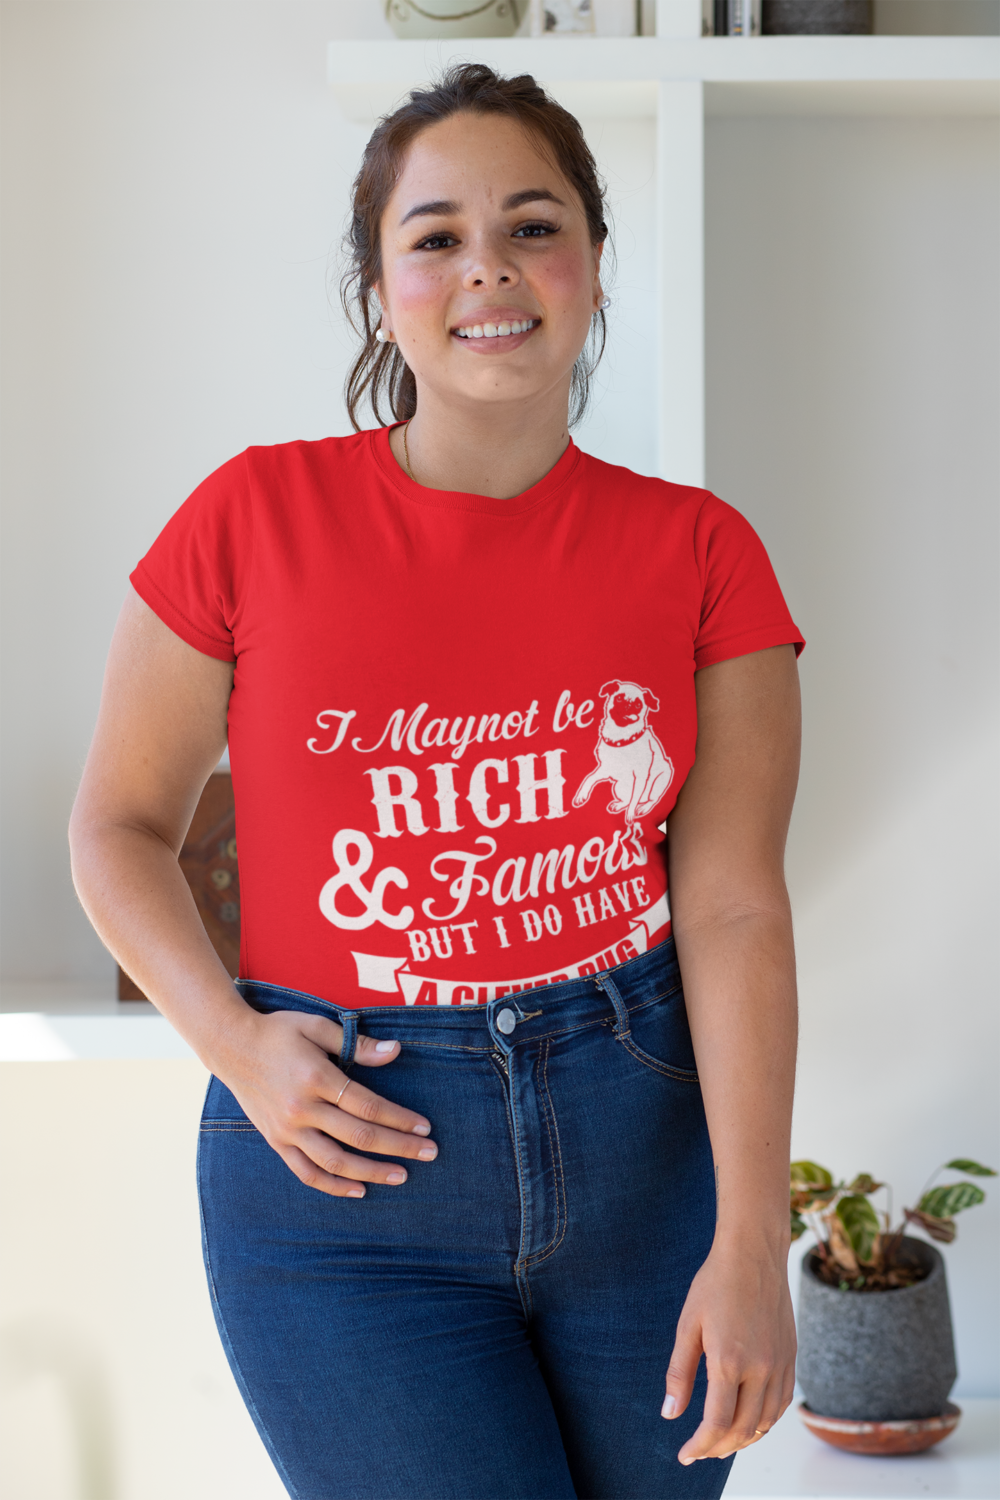 plus size t shirt mockup featuring a smiling woman 31033